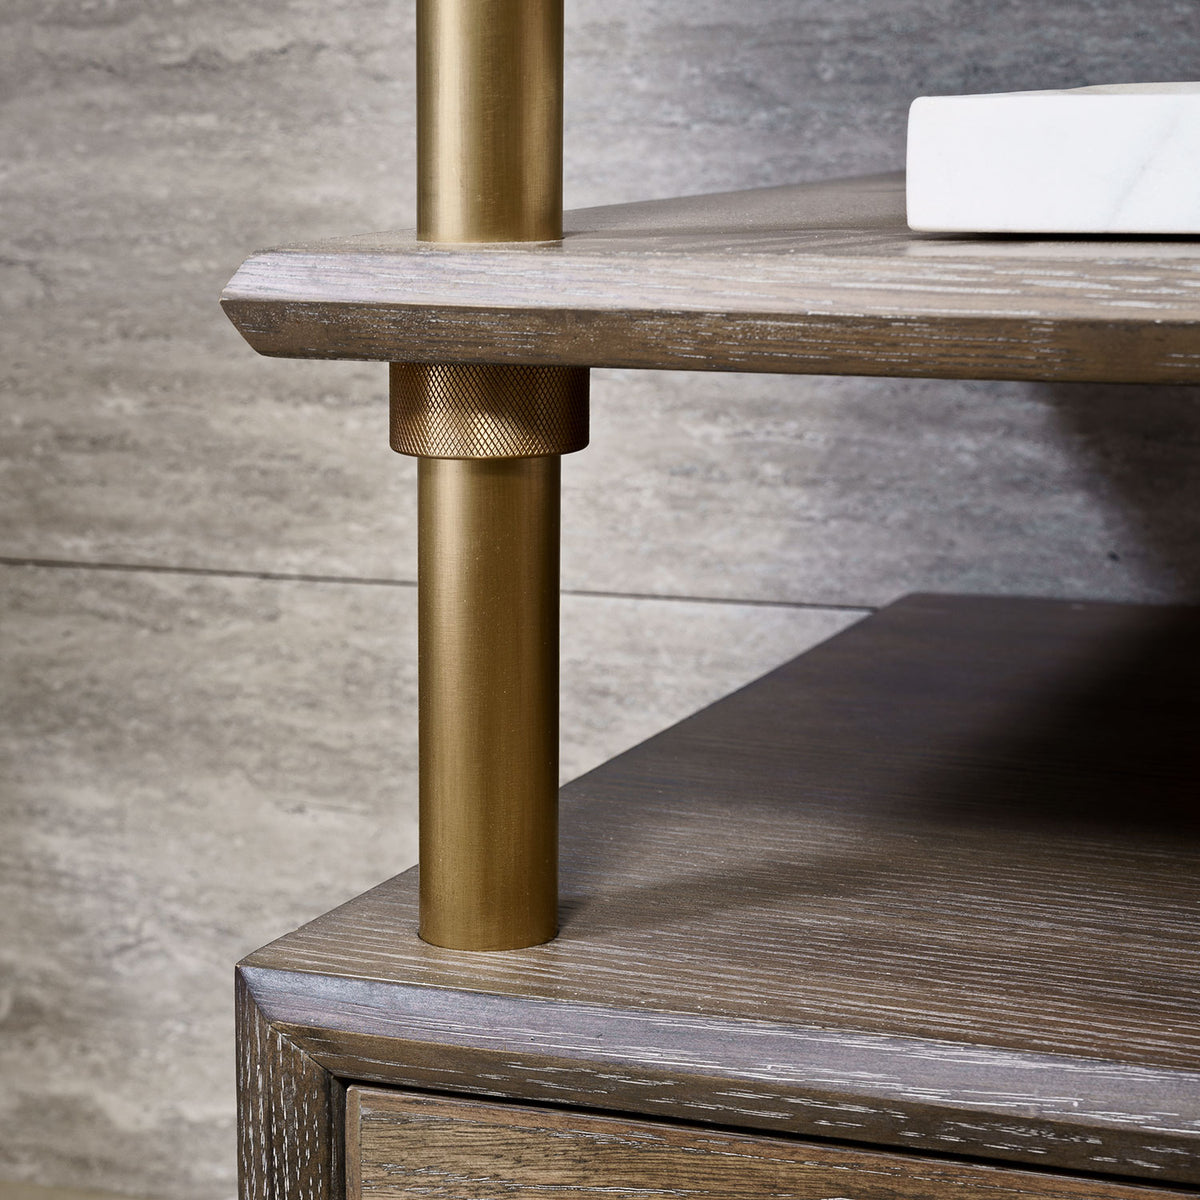 detail of Elemental Classic fittings in aged brass and cement gray wood image 3 of 4